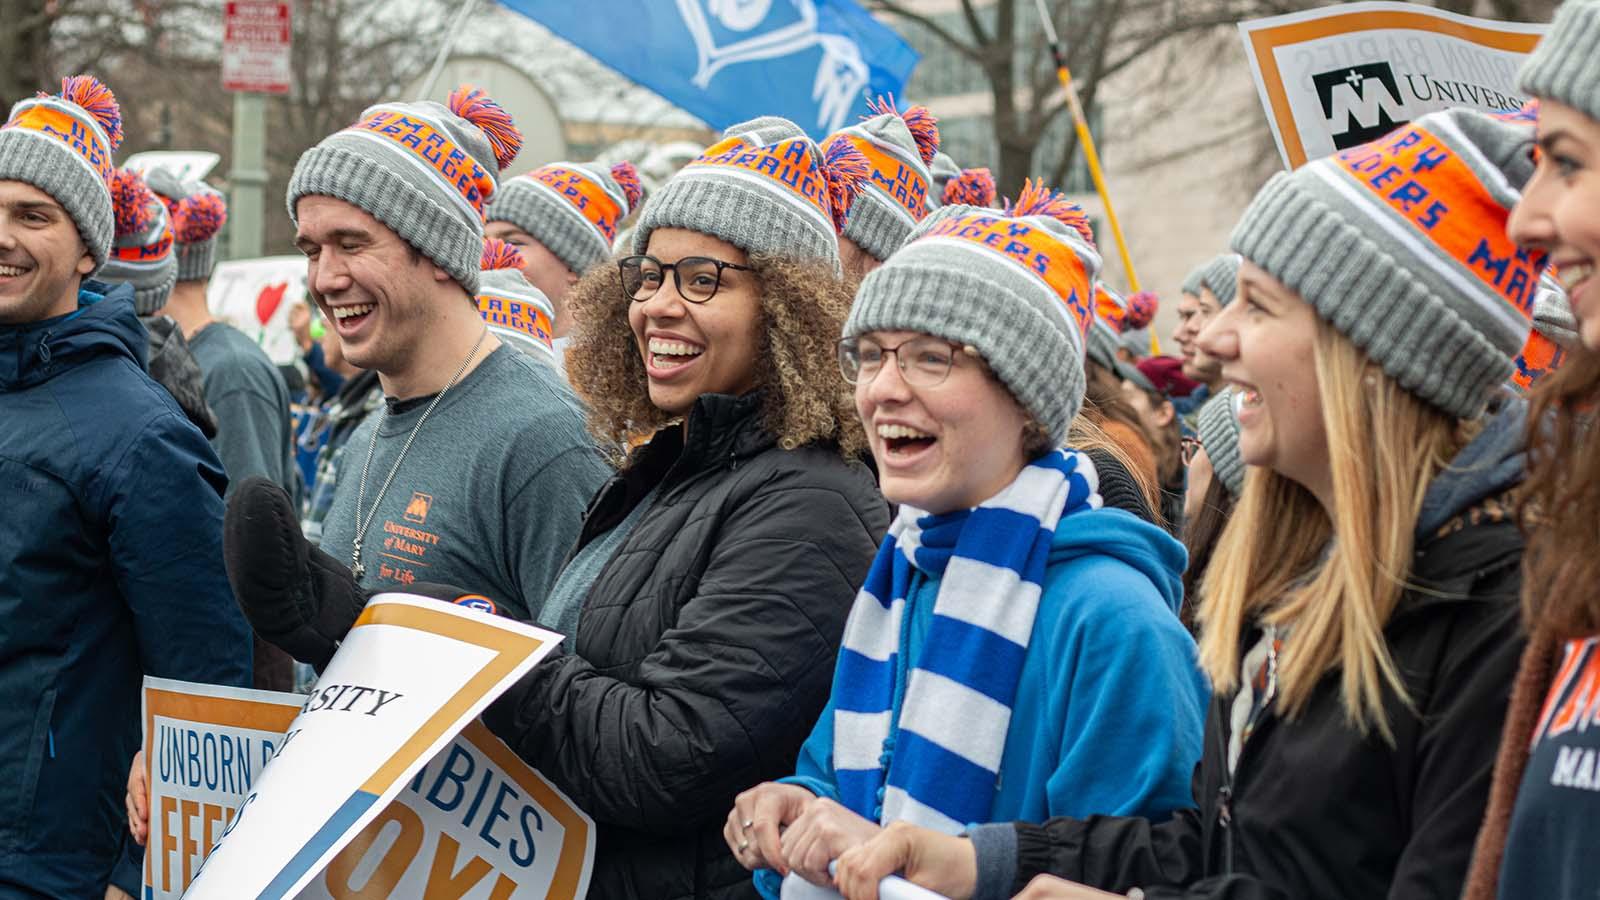 Smiling Collegians for Life members at the annual March for Life in Washington DC.